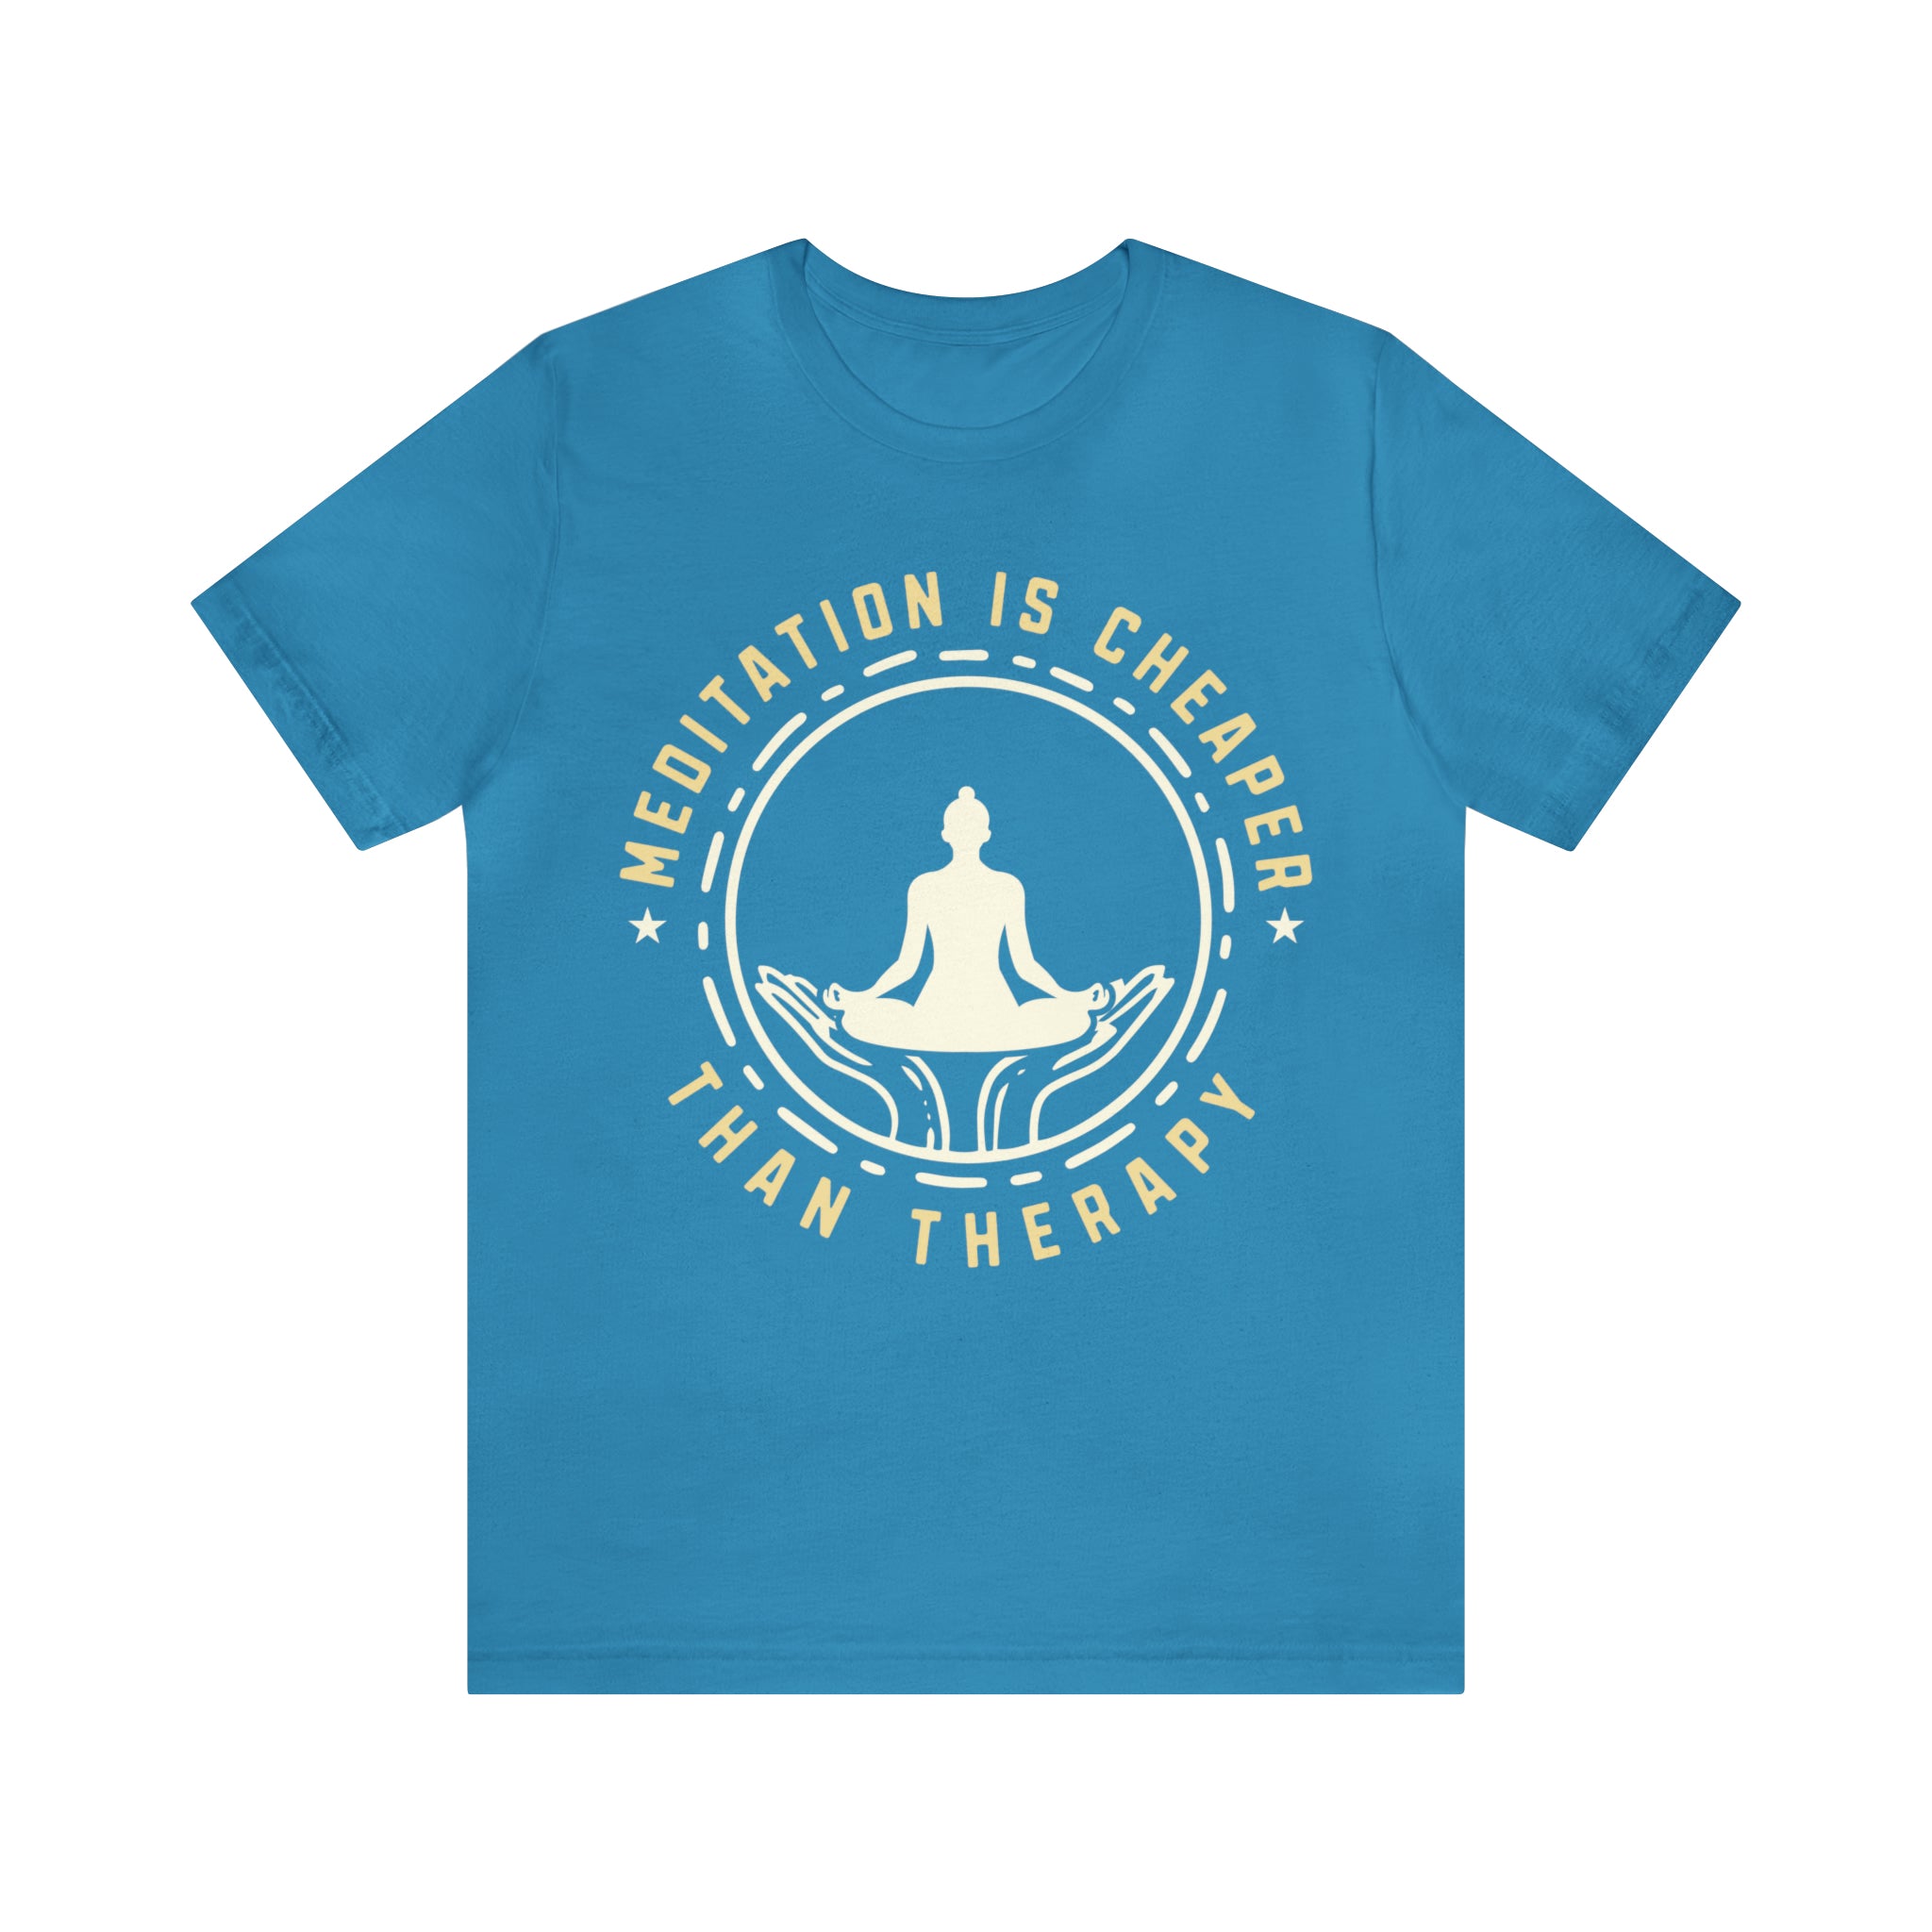 Meditation is Cheaper Than Therapy Short Sleeve Tee